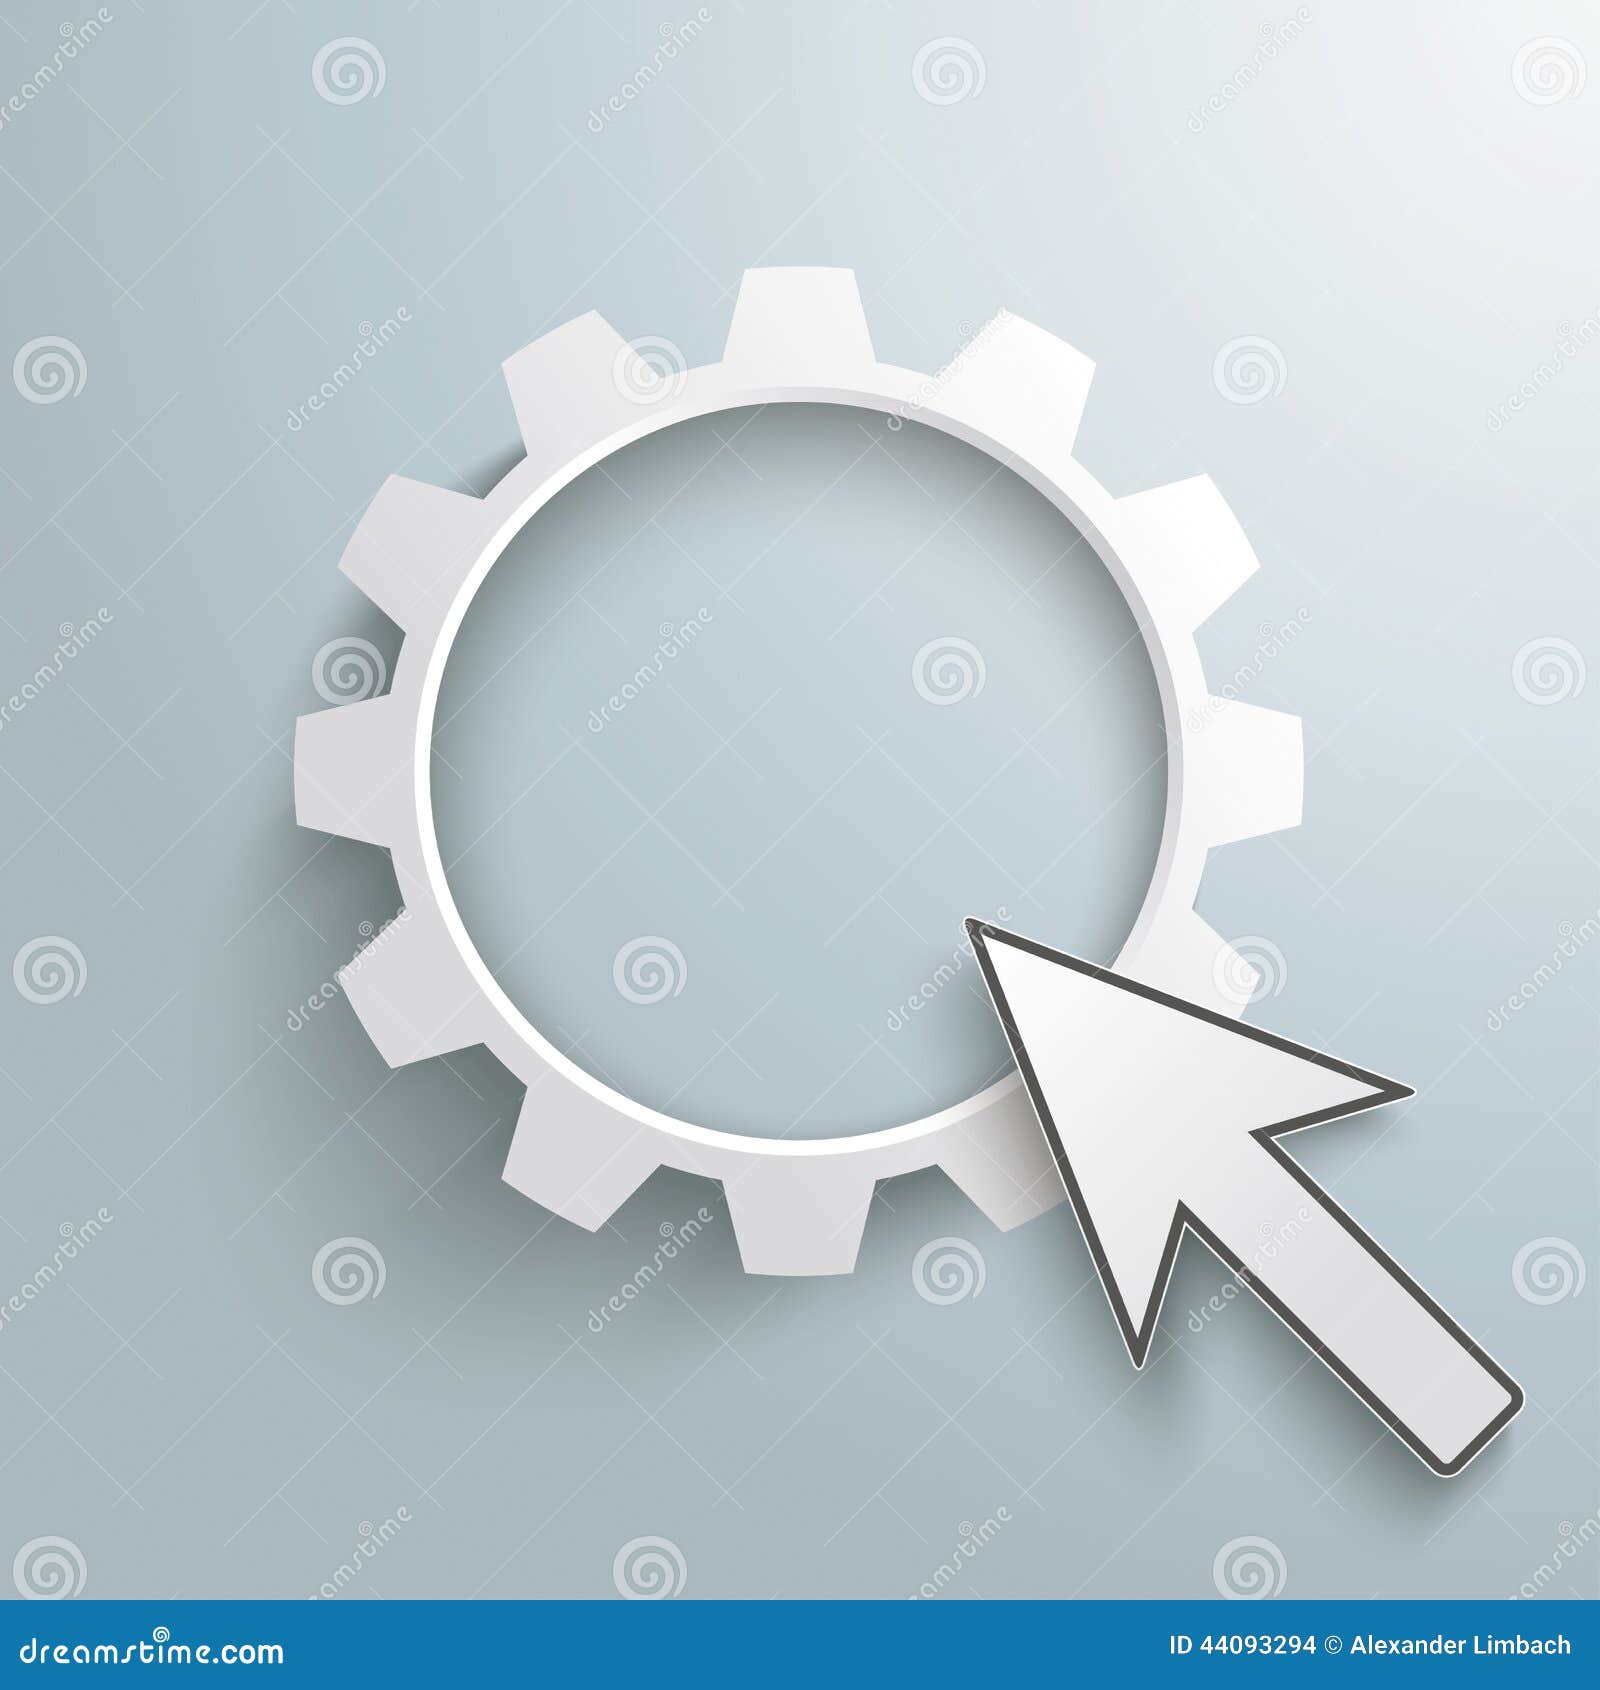 Big White Gear Cursor. Infographic design on the grey background.